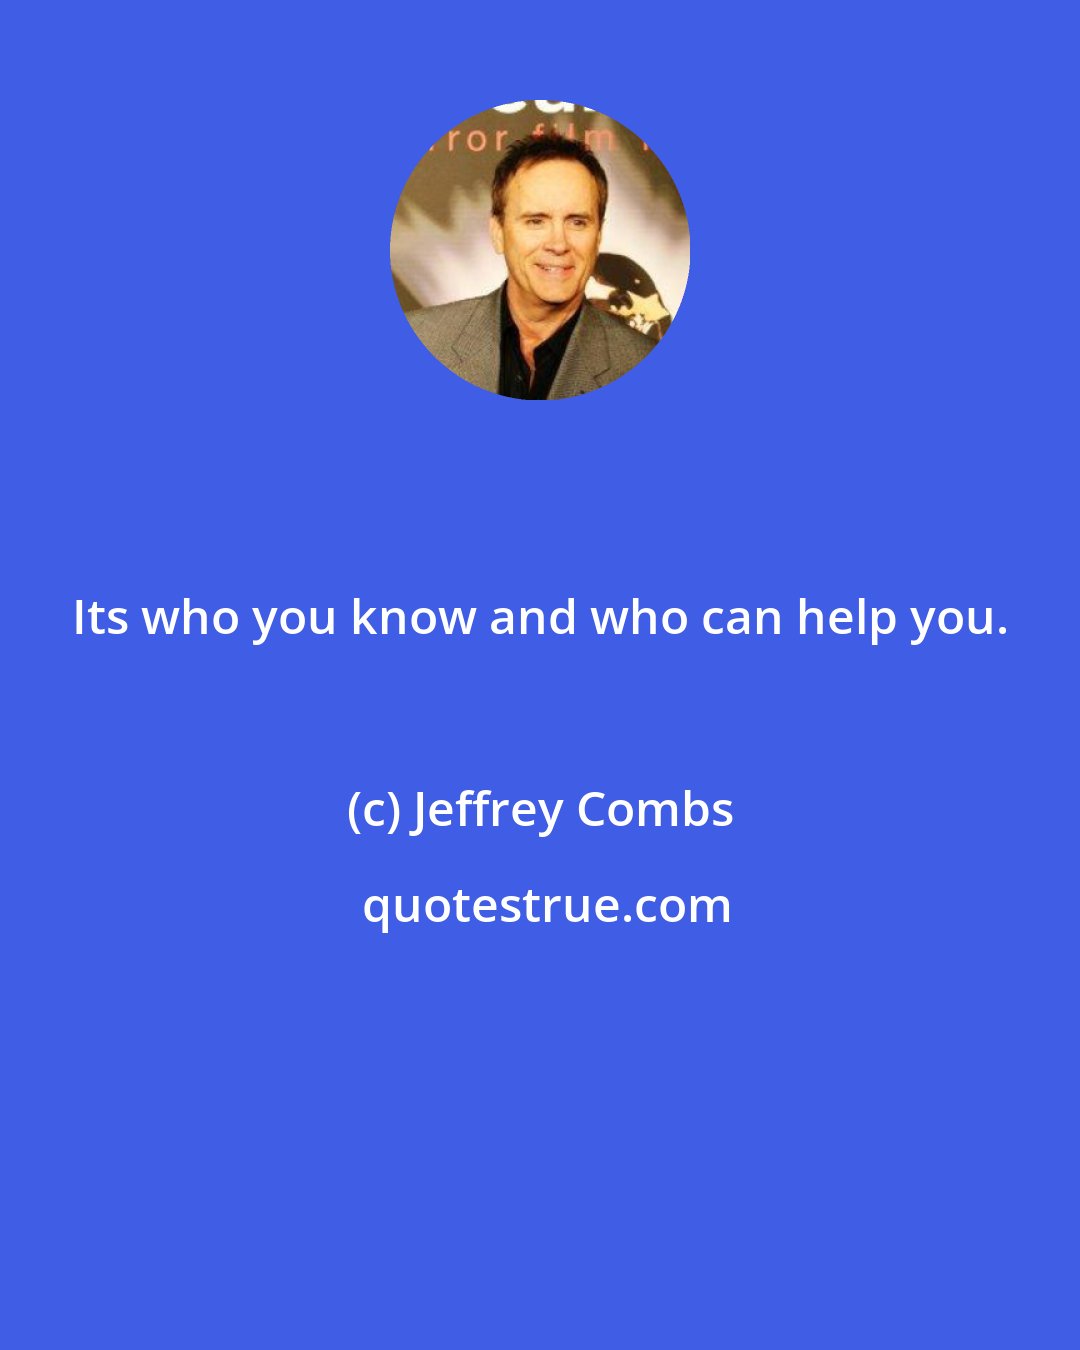 Jeffrey Combs: Its who you know and who can help you.